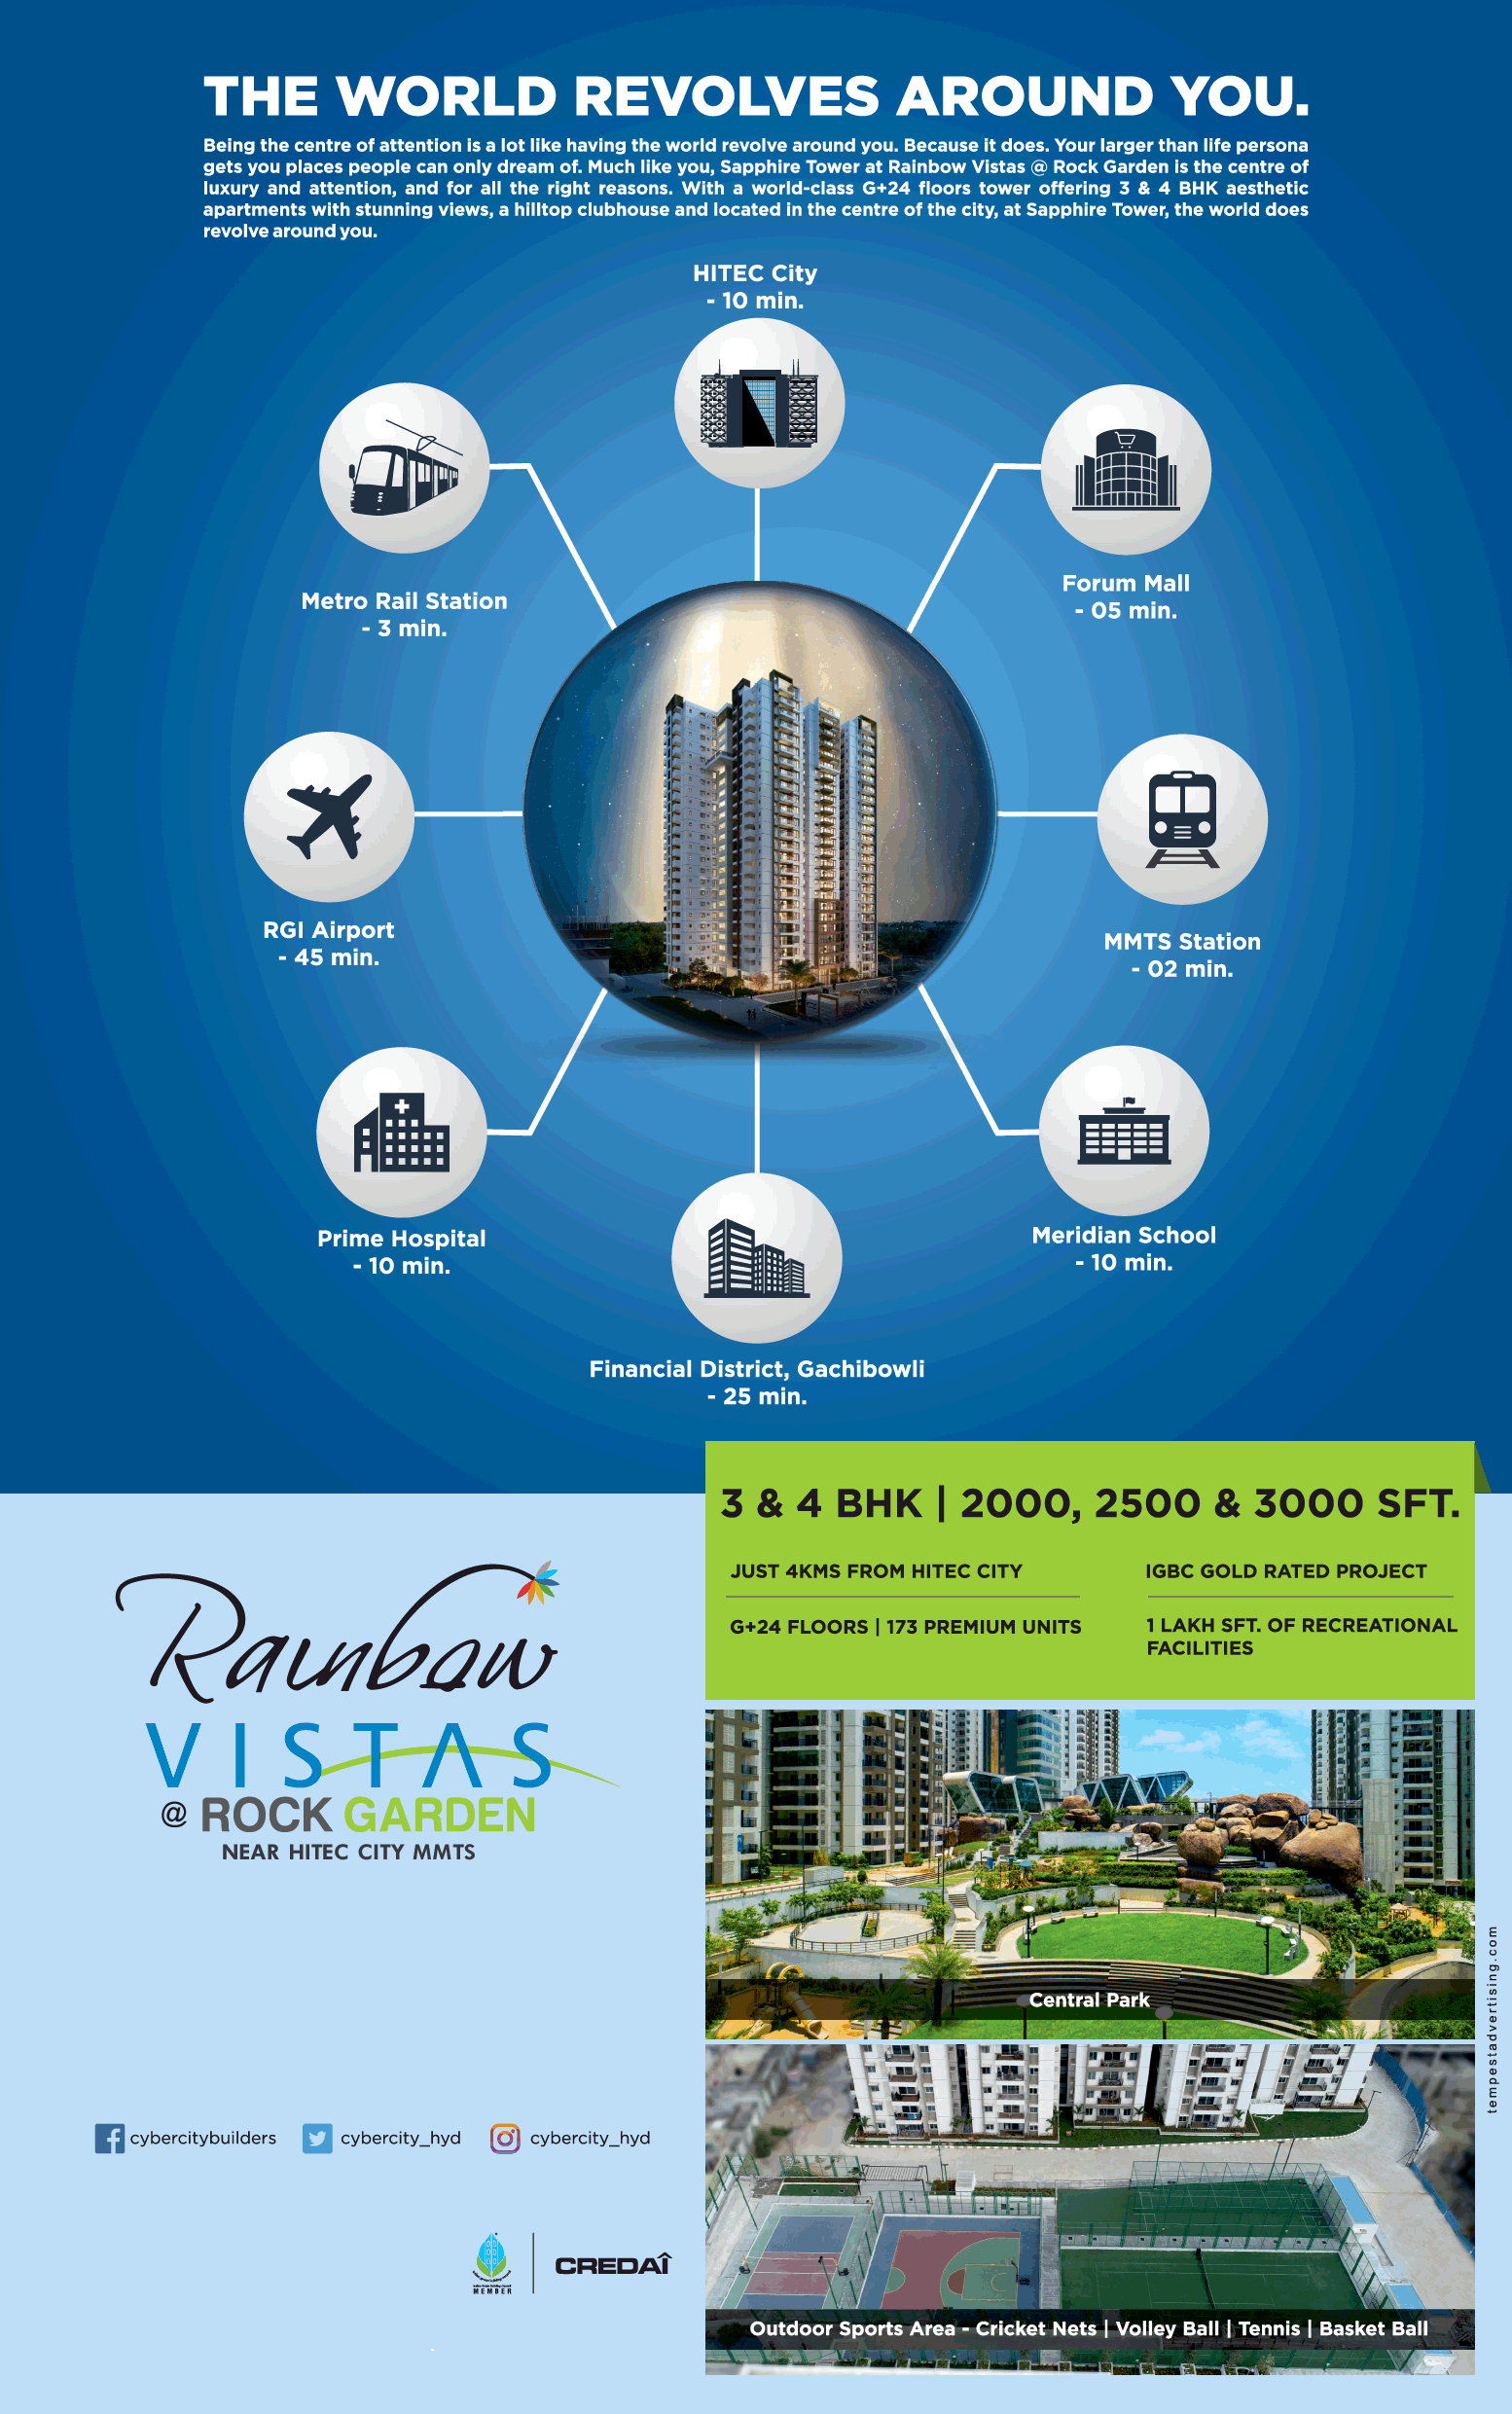 3 and 4 BHK apartments at Rainbow Vistas Rock Gardens in Hyderabad Update